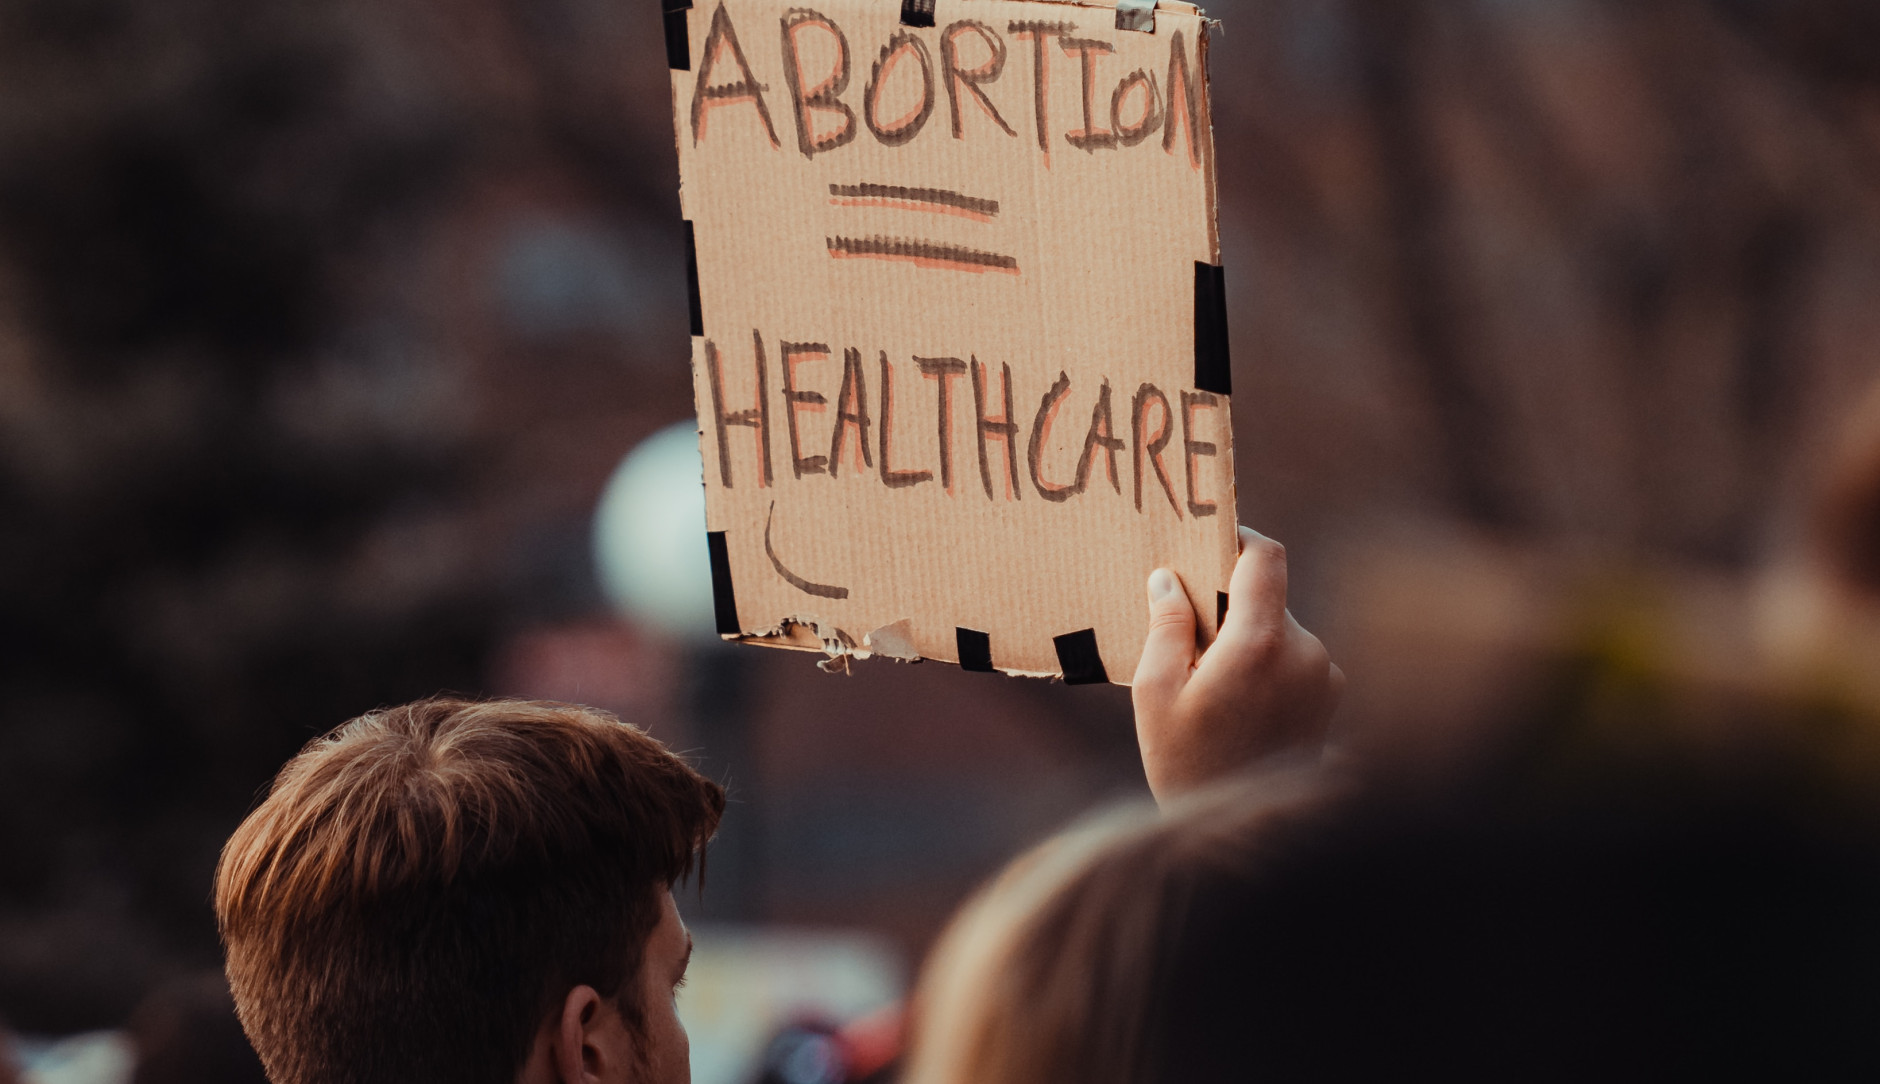 'Abortion = Healthcare' sign at a pro choice march.